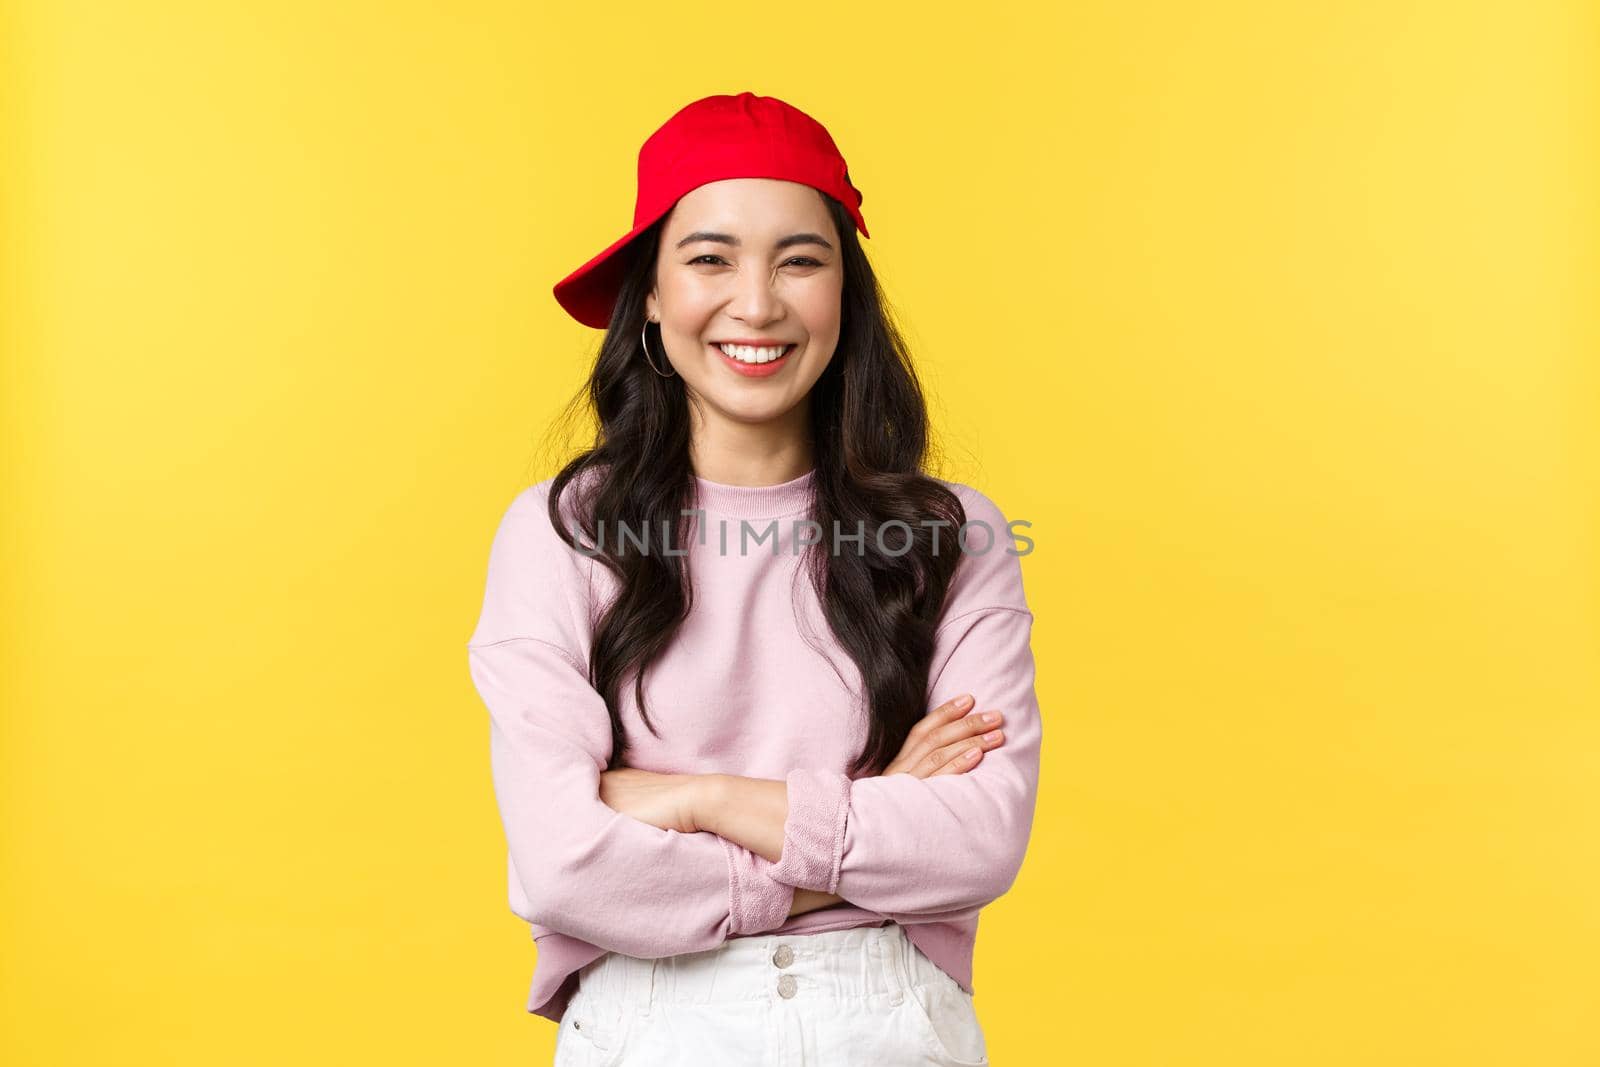 People emotions, lifestyle leisure and beauty concept. Happy cheerful asian woman smiling and laughing, cross arms chest, looking cool in hipster red cap over yellow background.